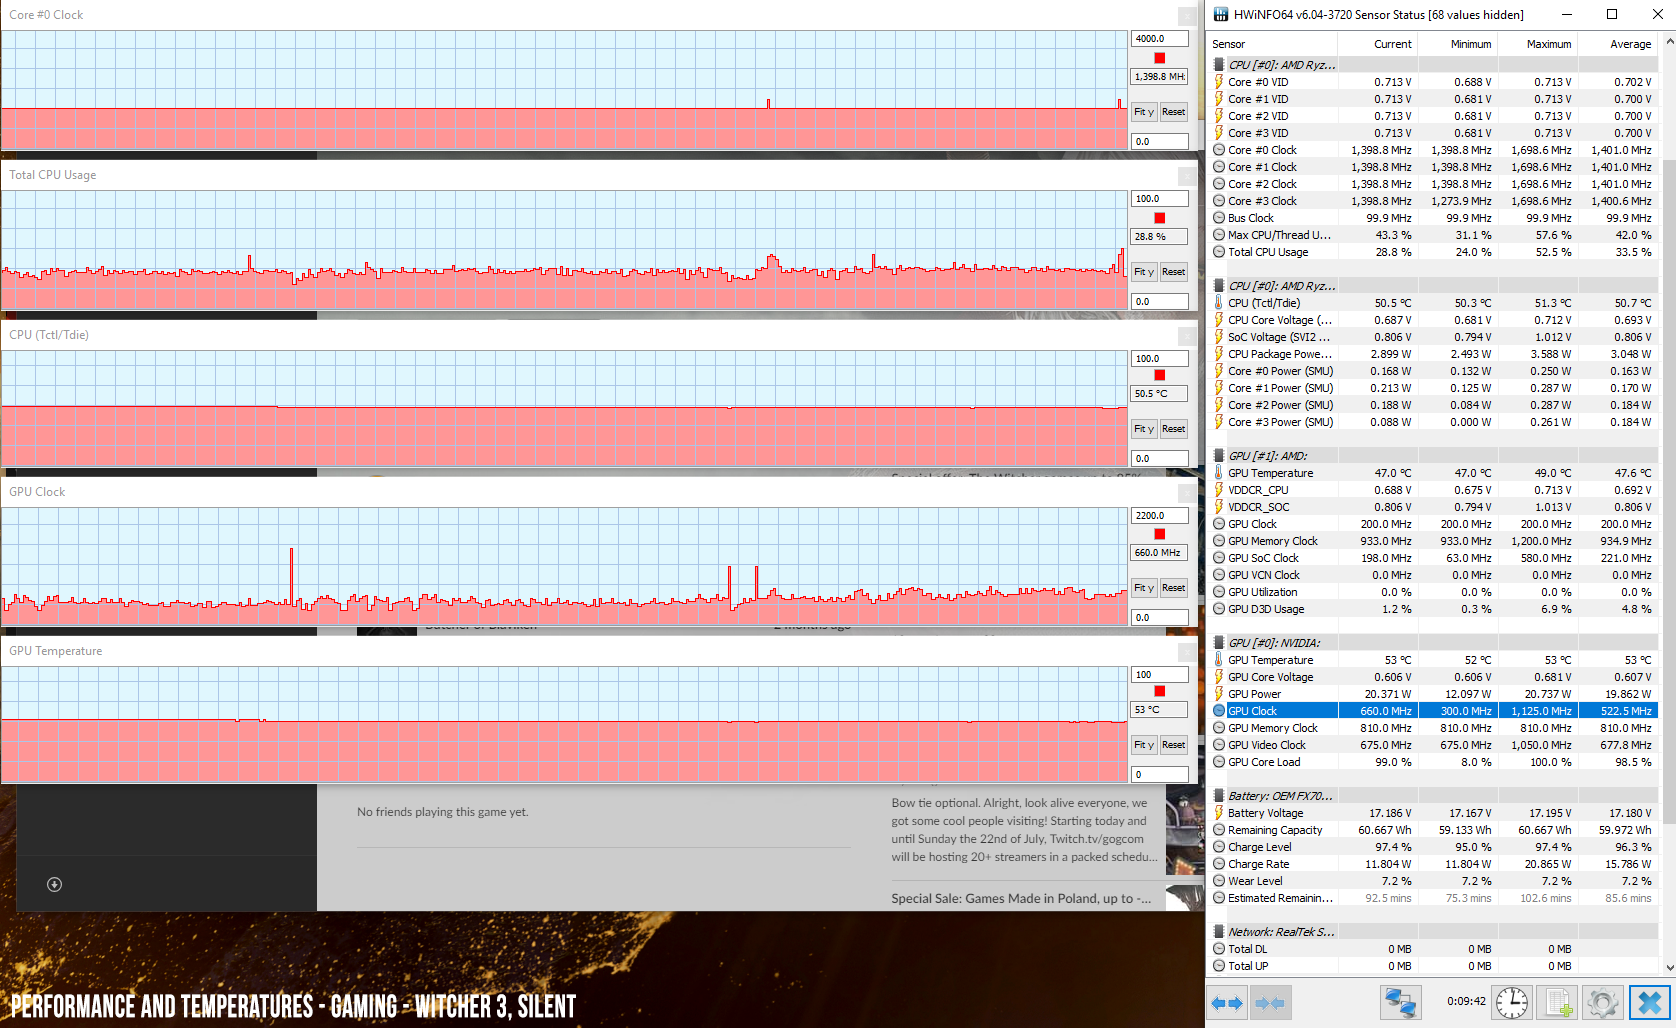 perf temps gaming witcher3 OC silent